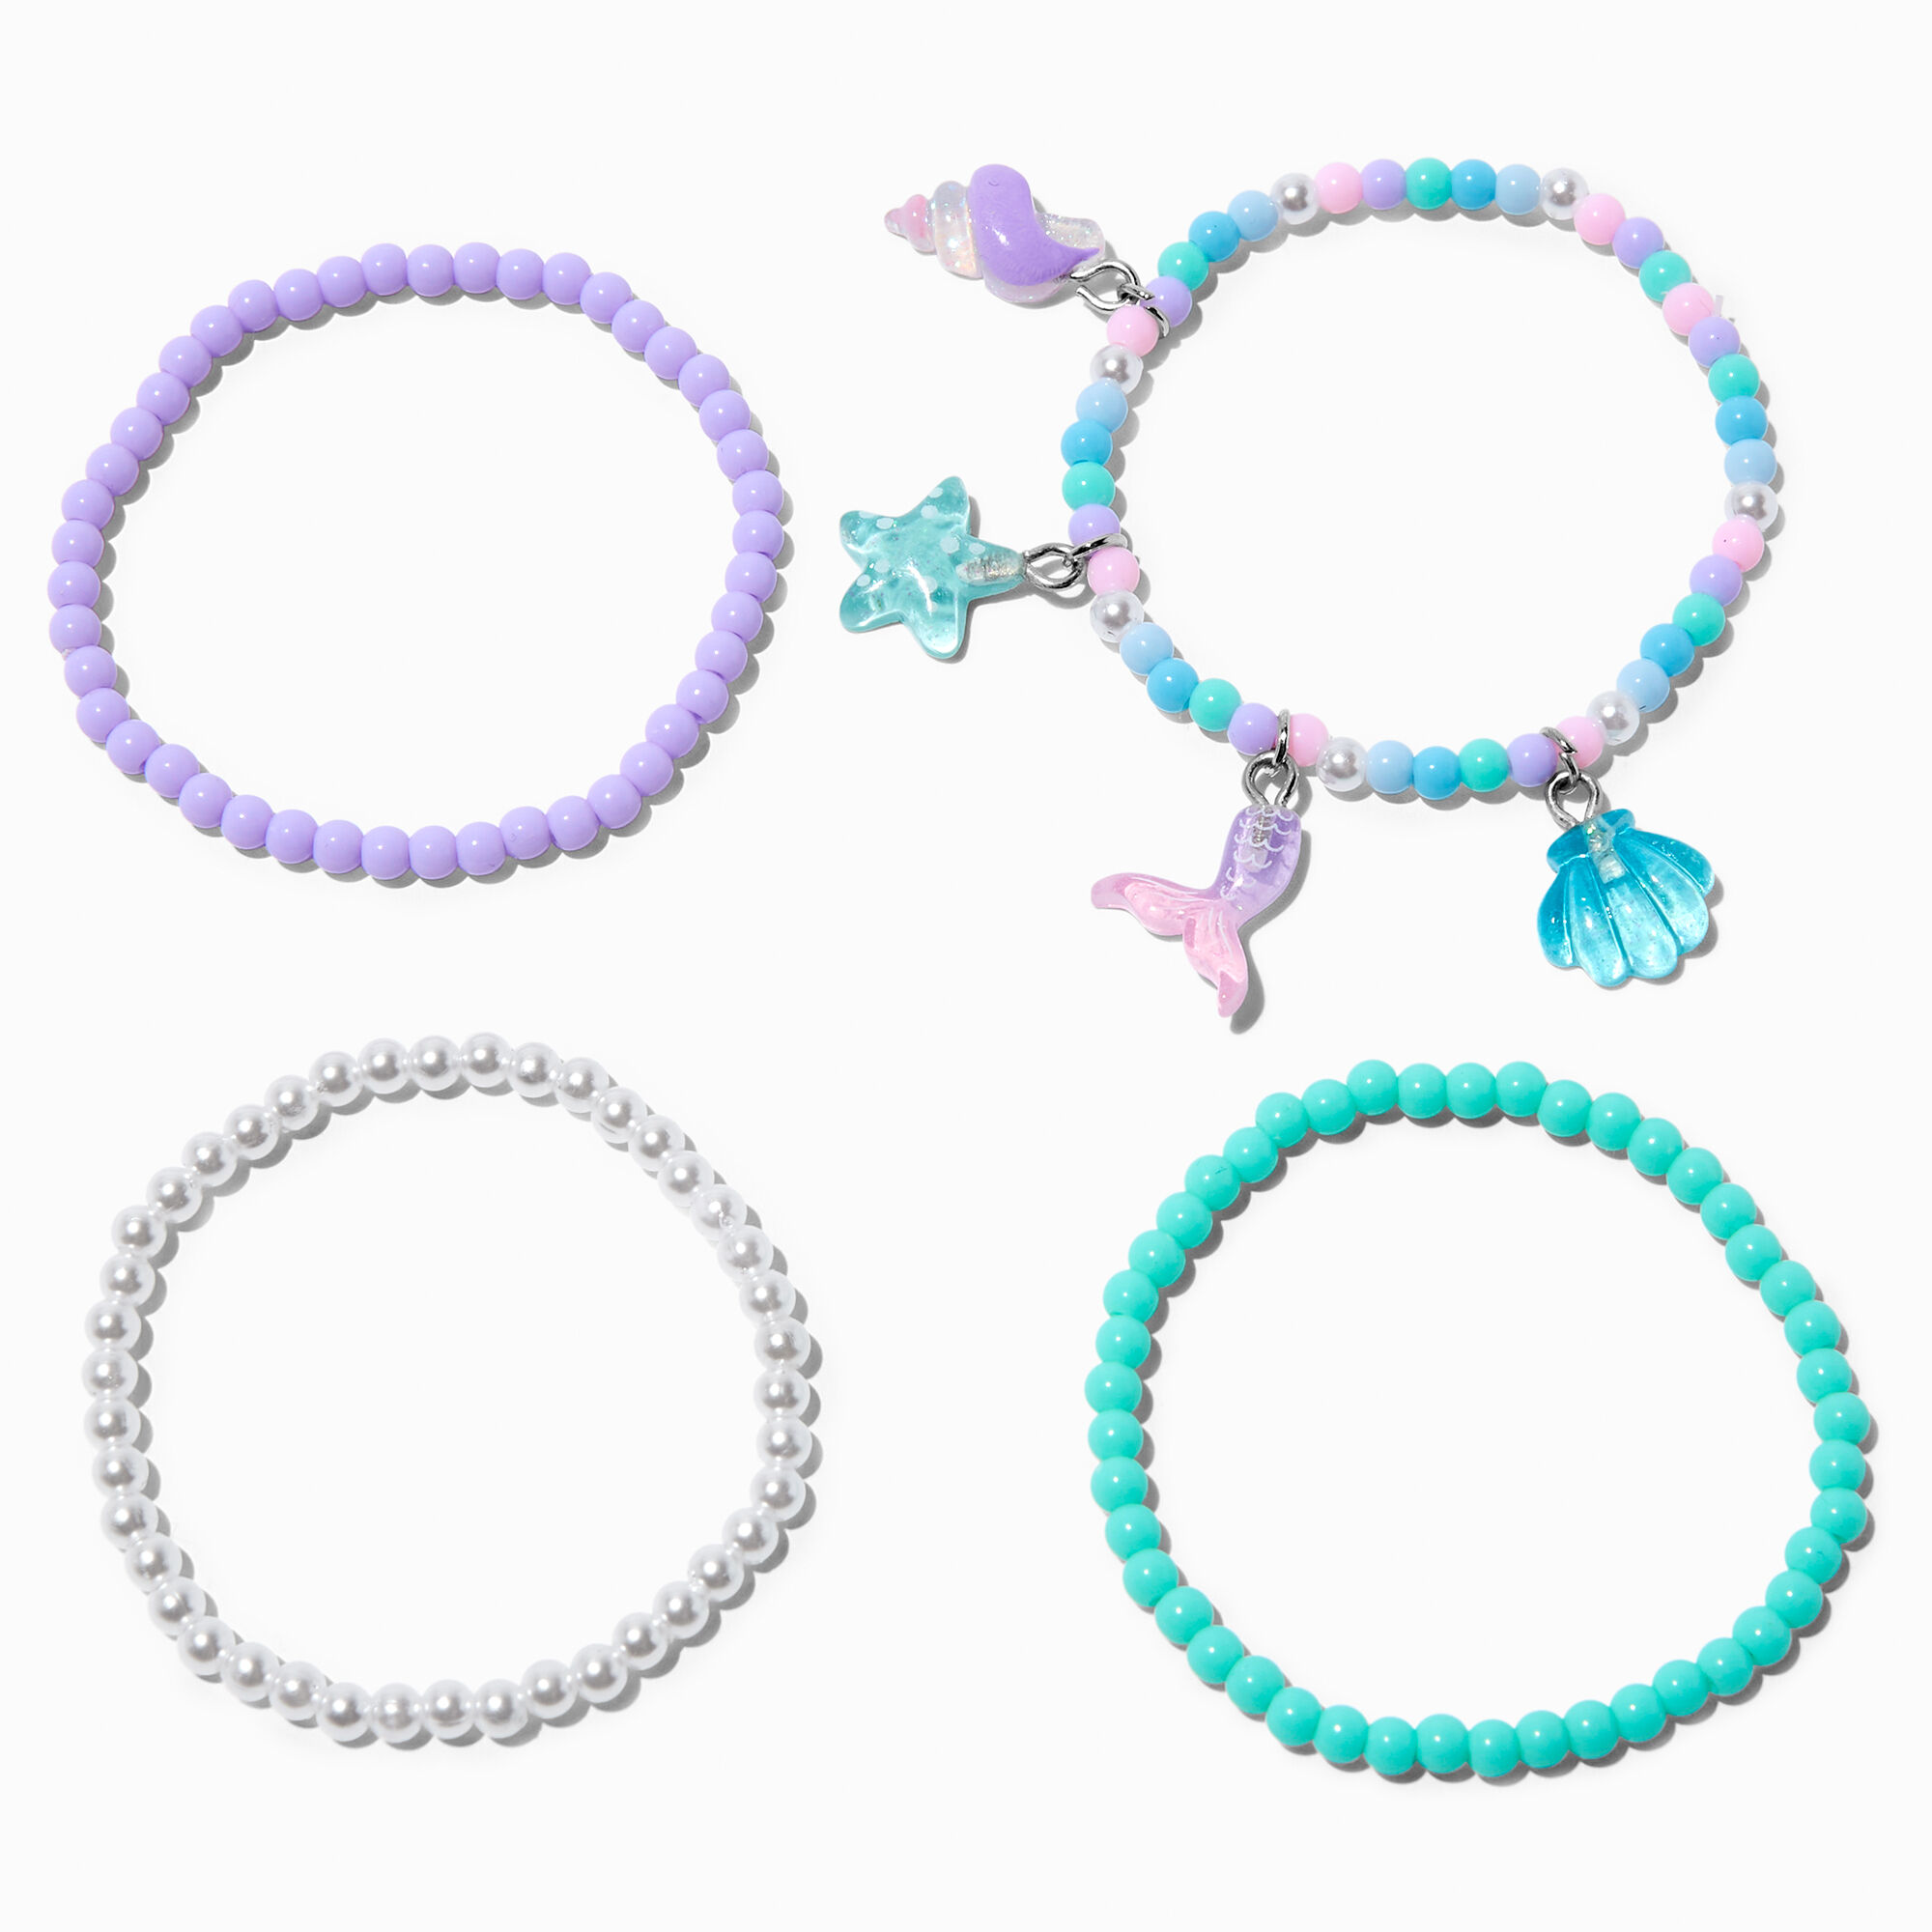 View Claires Club Mermaid Seed Bead Stretch Bracelets 4 Pack information